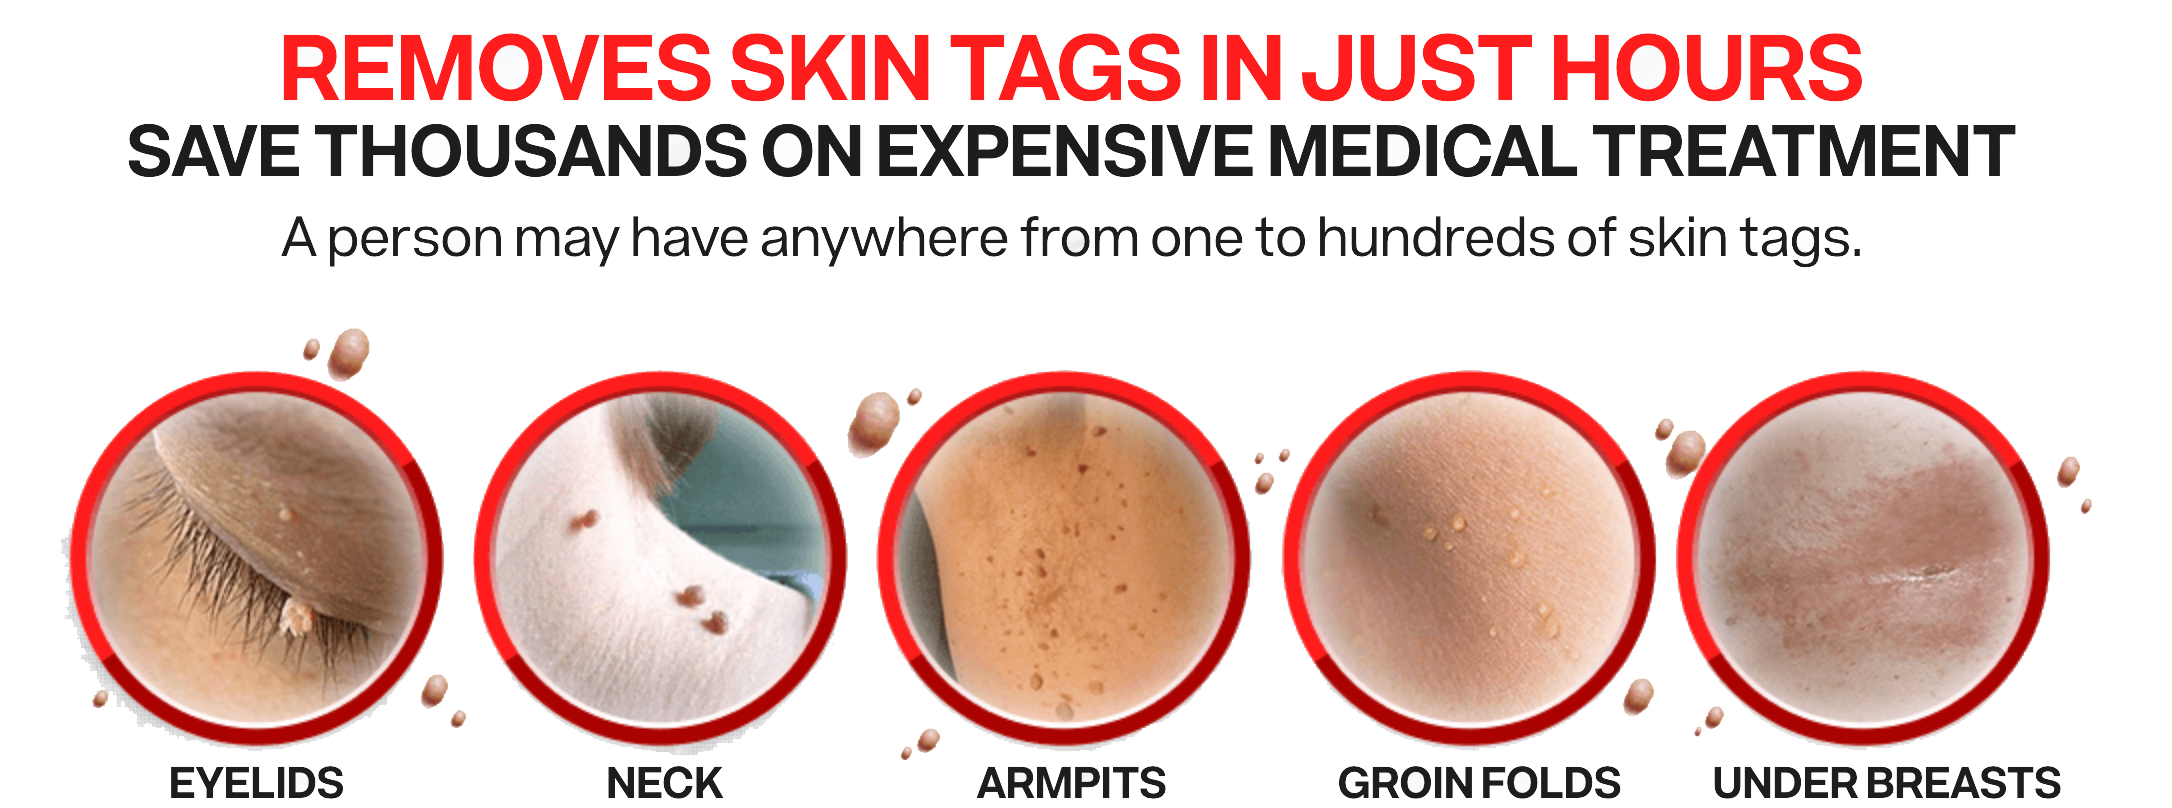 How to care for your skin after tag removal surgery